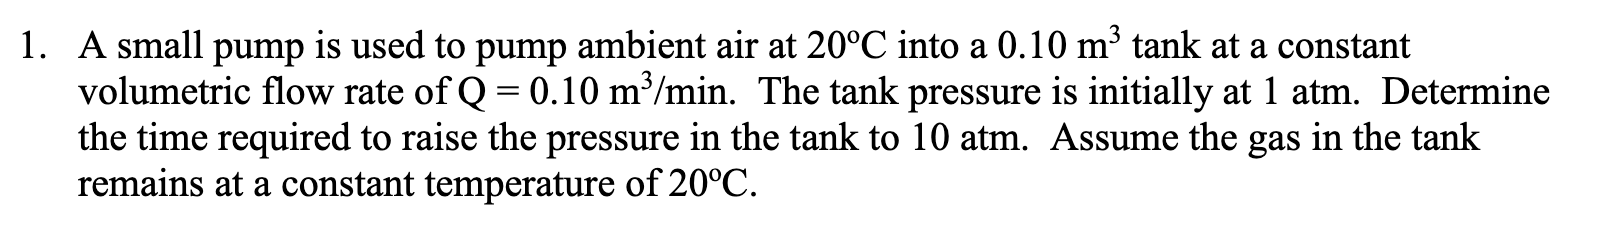 A small pump is used to pump ambient air at 20°C into a 0.10 m³ tank at a constant
volumetric flow rate of Q = 0.10 m³/min. The tank pressure is initially at 1 atm. Determine
the time required to raise the pressure in the tank to 10 atm. Assume the gas in the tank
remains at a constant temperature of 20°C.
